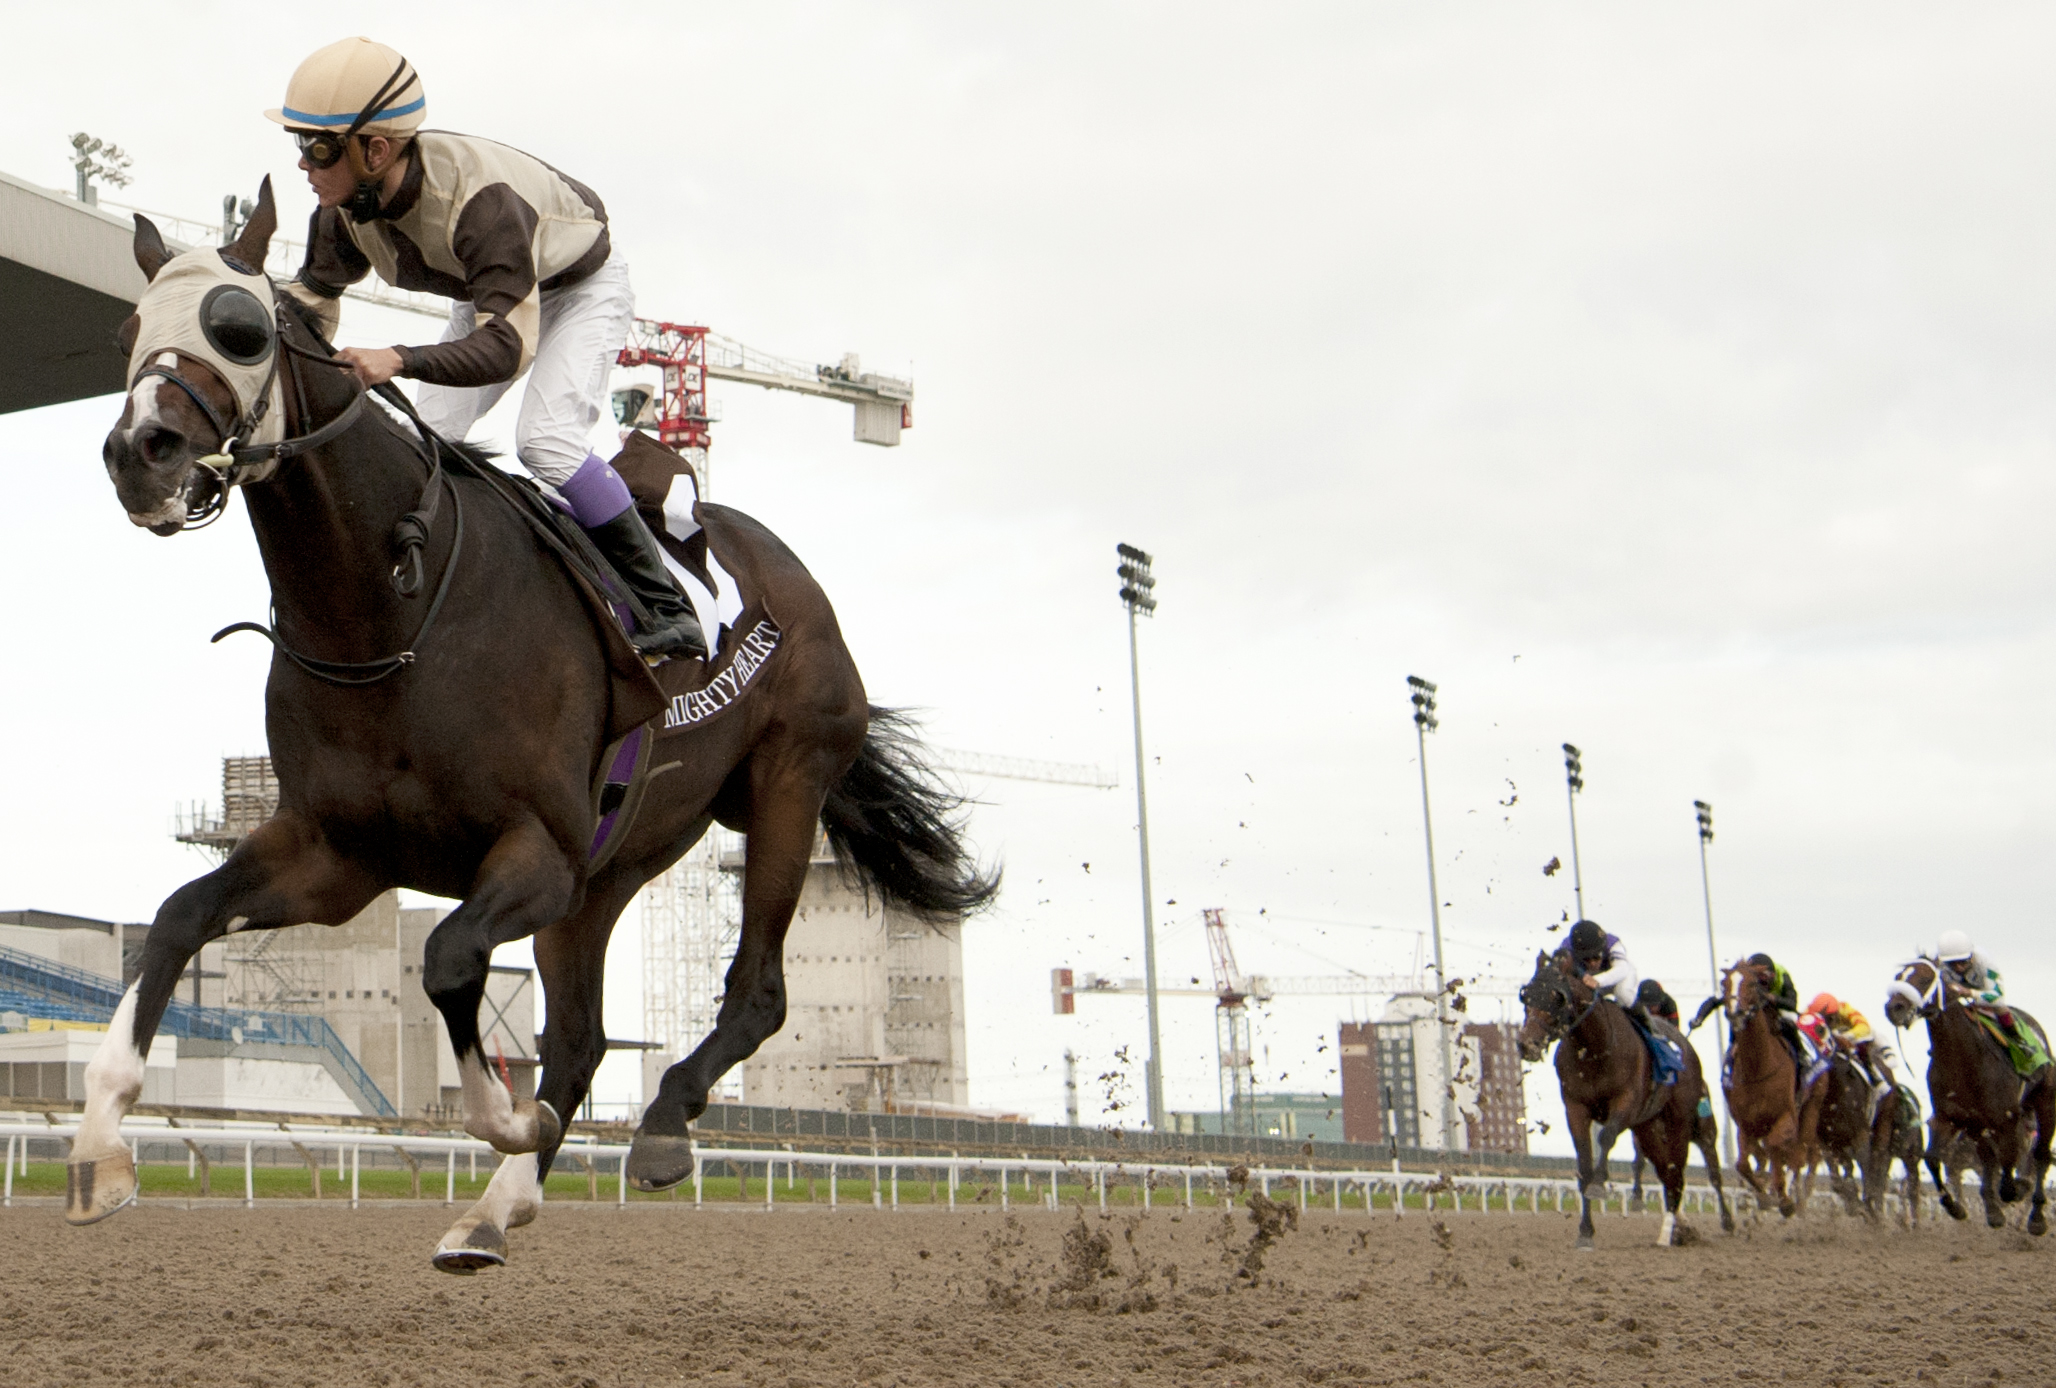 Mighty Heart is a runaway winner of Canada’s greatest race, the Queen’s Plate, at Woodbine racecourse in Toronto in September. Photo: Michael Burns